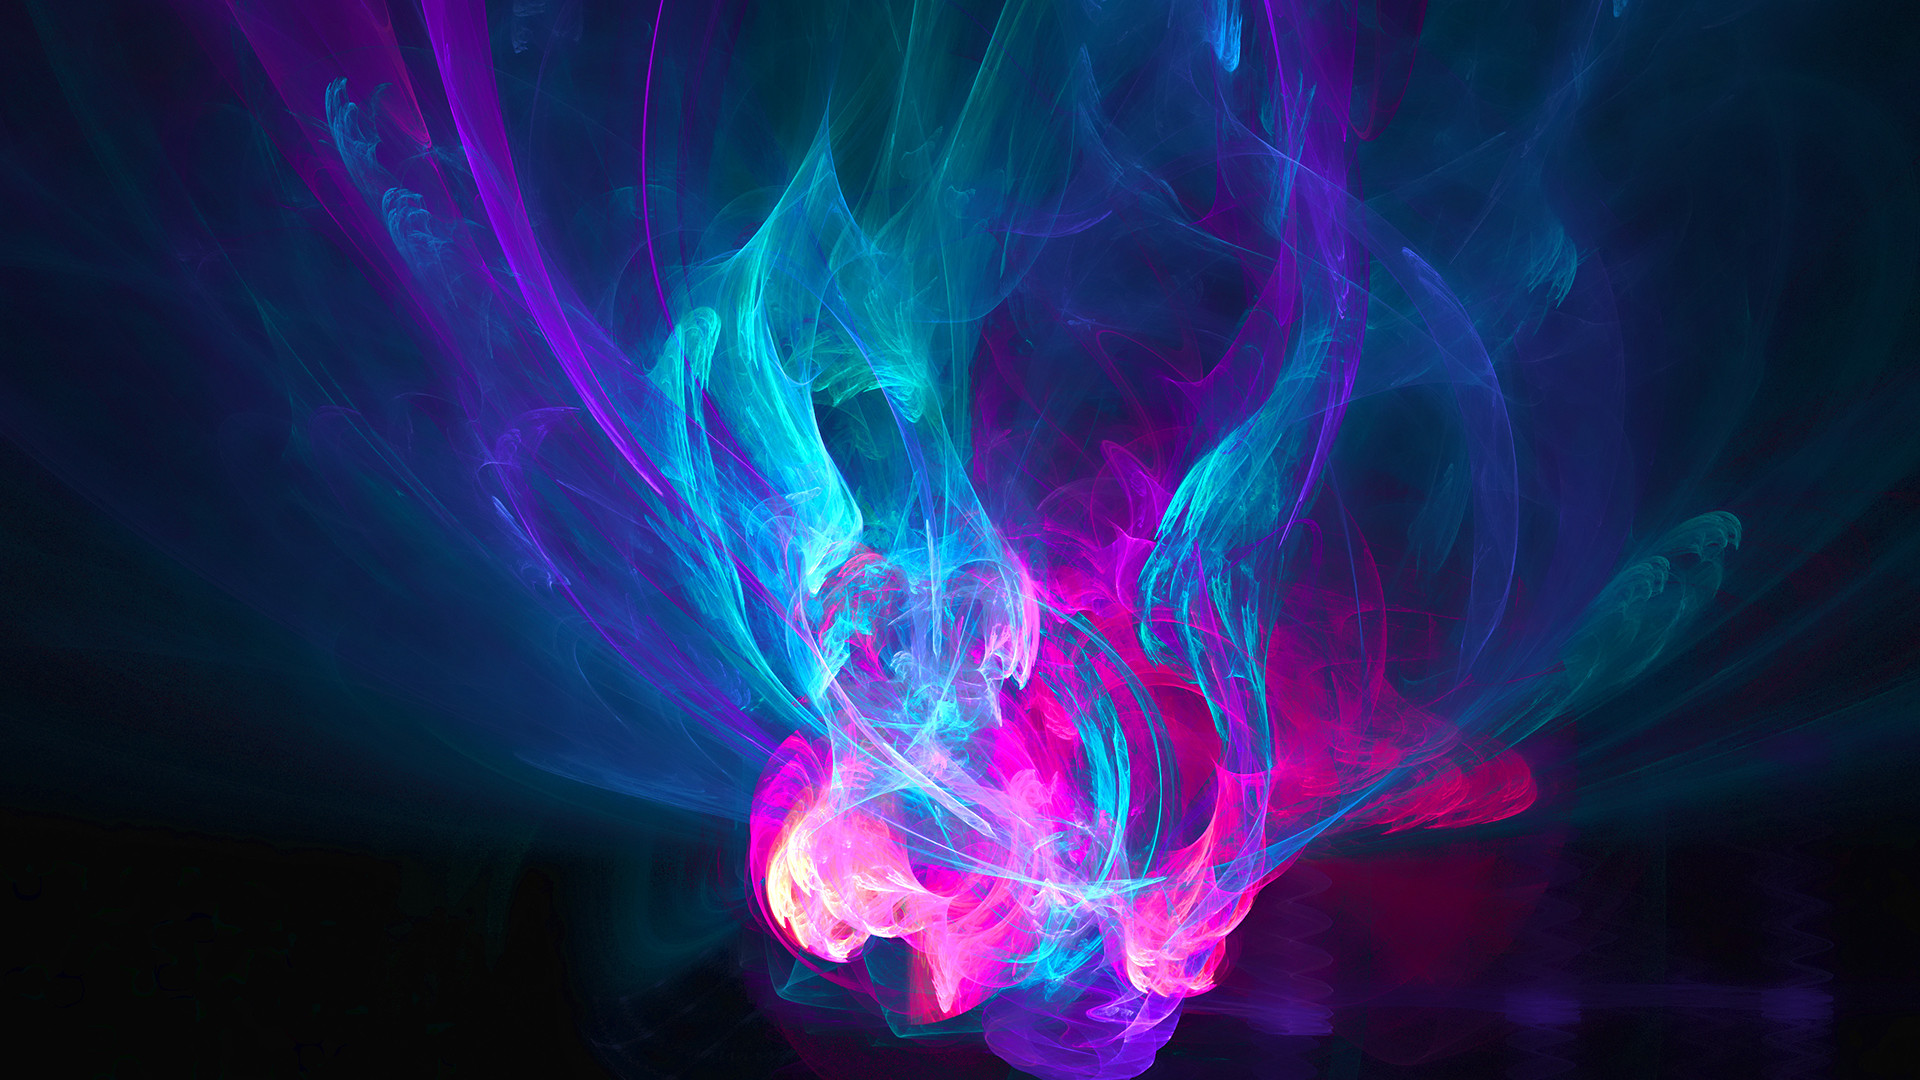 1920x1080 abstract fire pink blue purple patterns hd wallpaper hd desktop wallpapers  cool images hd download apple background wallpapers windows free display ...